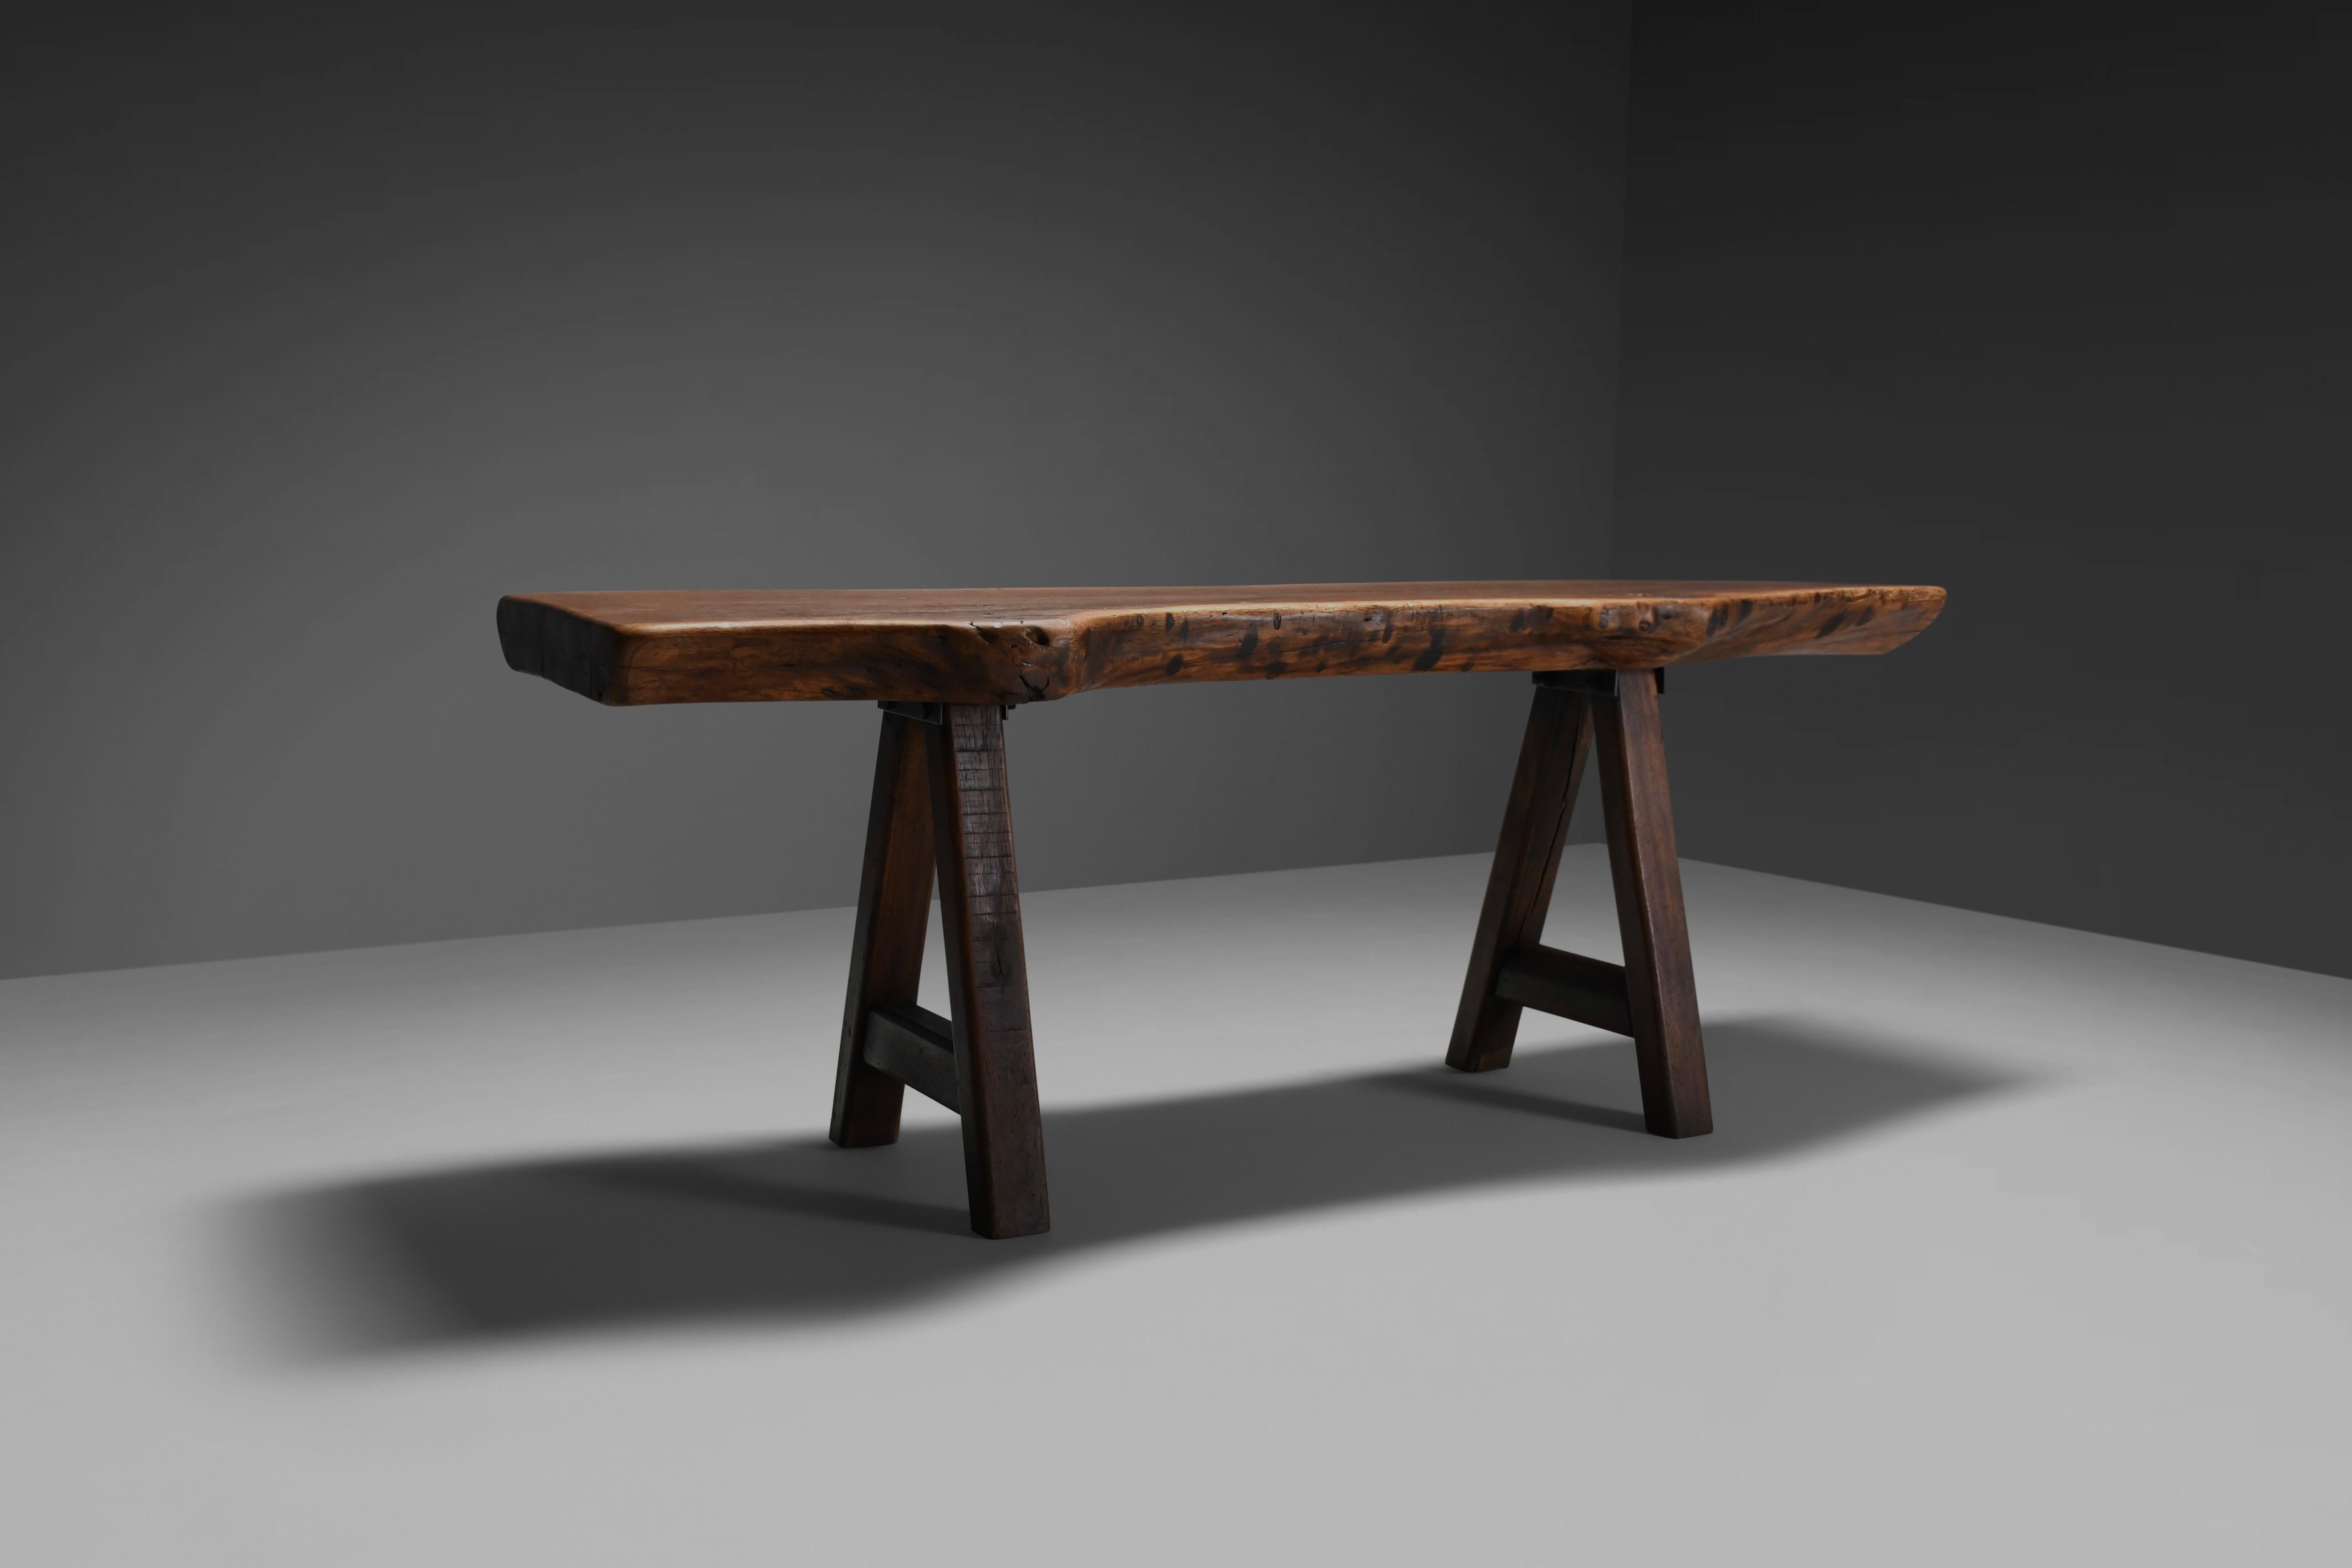 Handmade brutalist table in very good original condition.

Manufactured by Mobichalet, Belgium in the 1960s

The top is made from very heavy solid oak which was not heavily processed which results in organic and free-flowing edges.

The solid oak